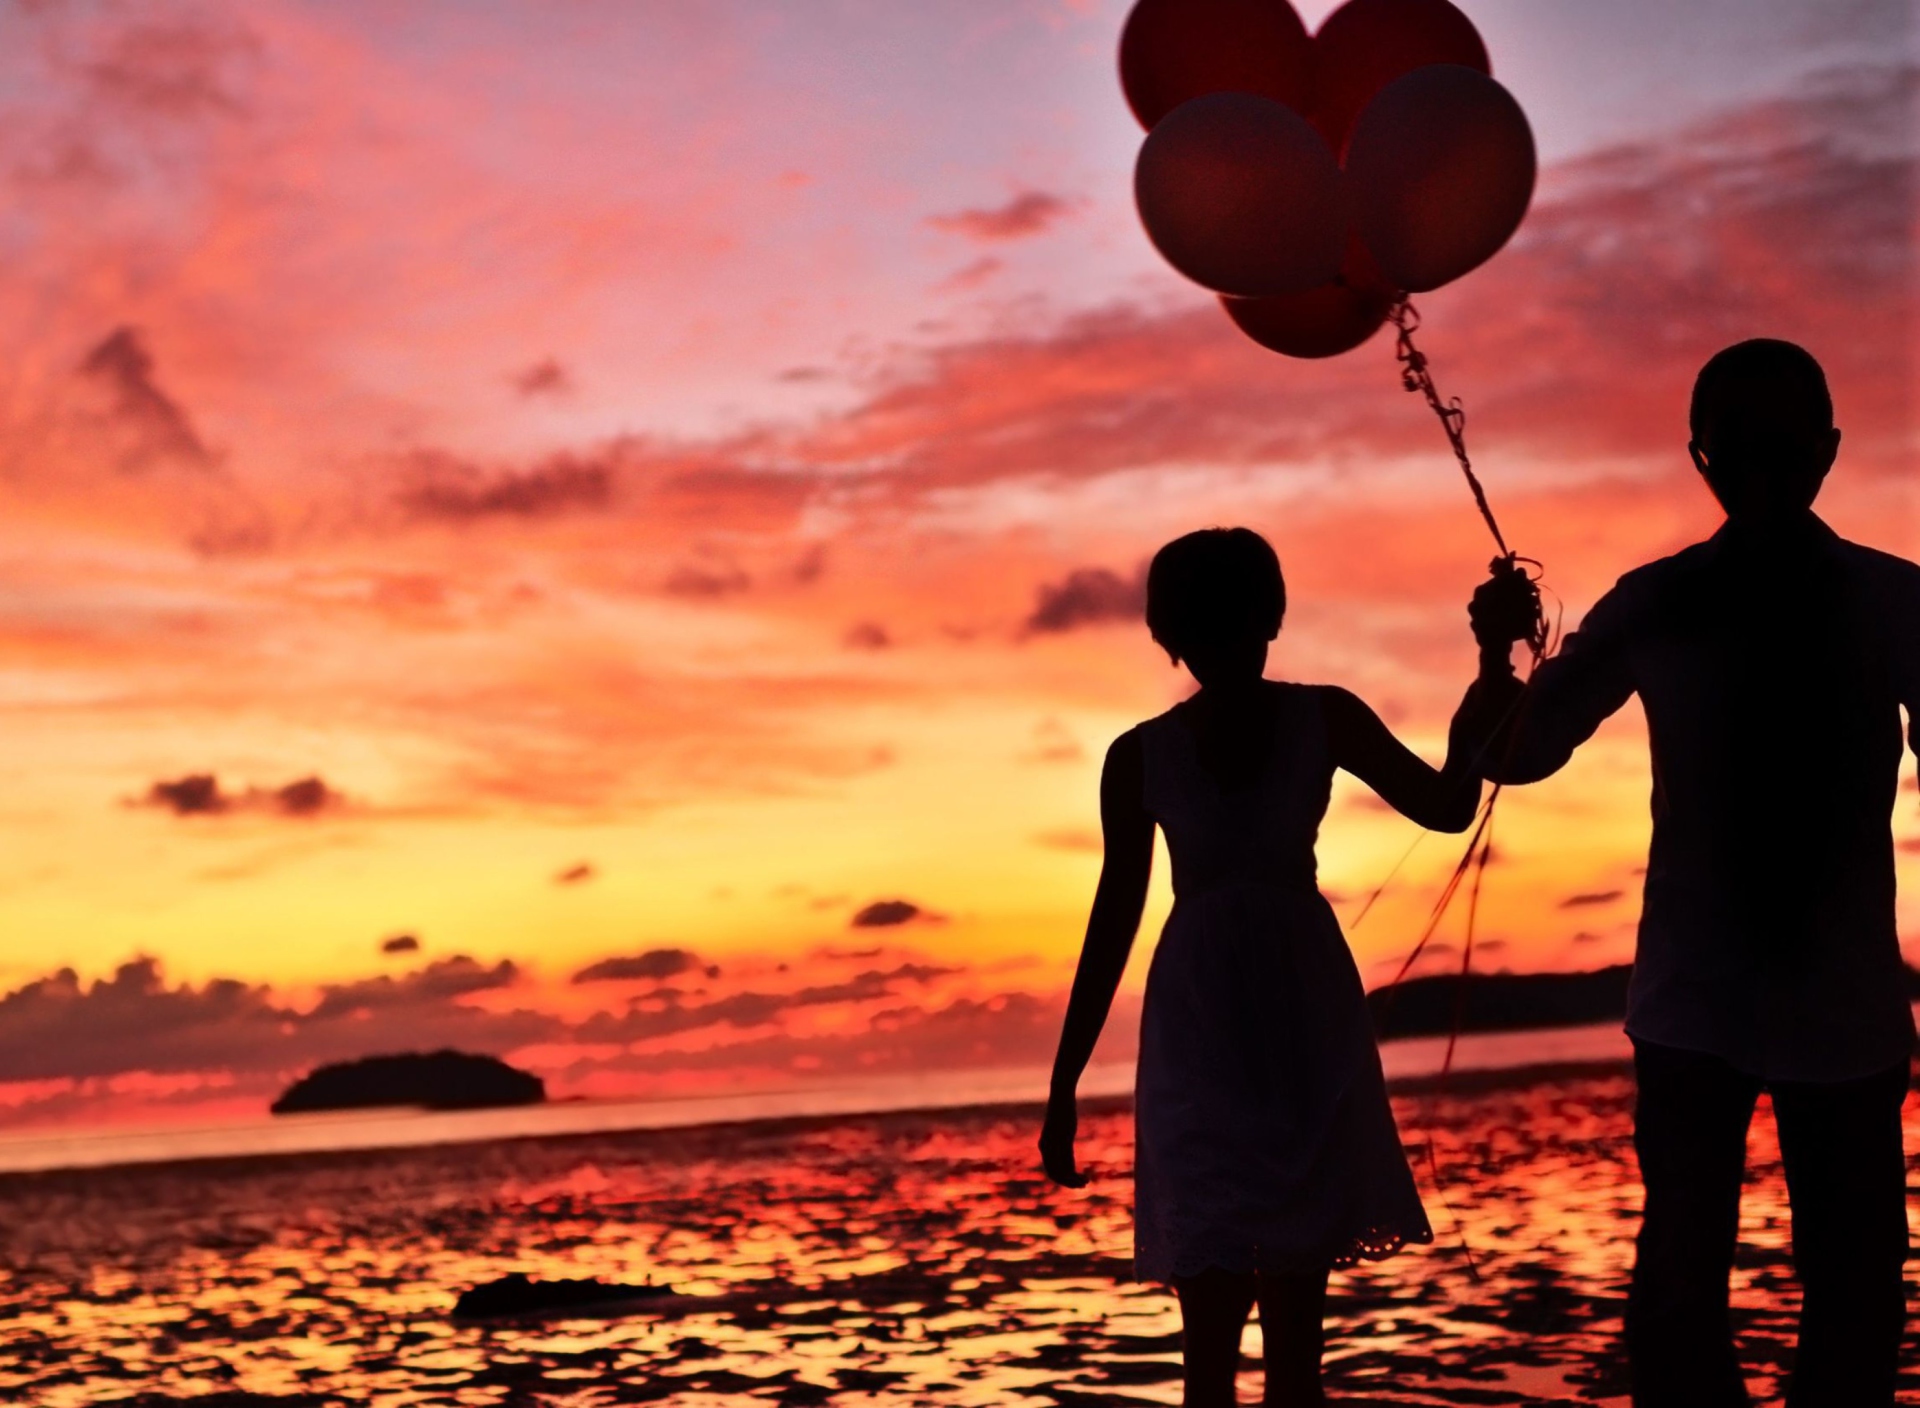 Обои Couple With Balloons Silhouette At Sunset 1920x1408